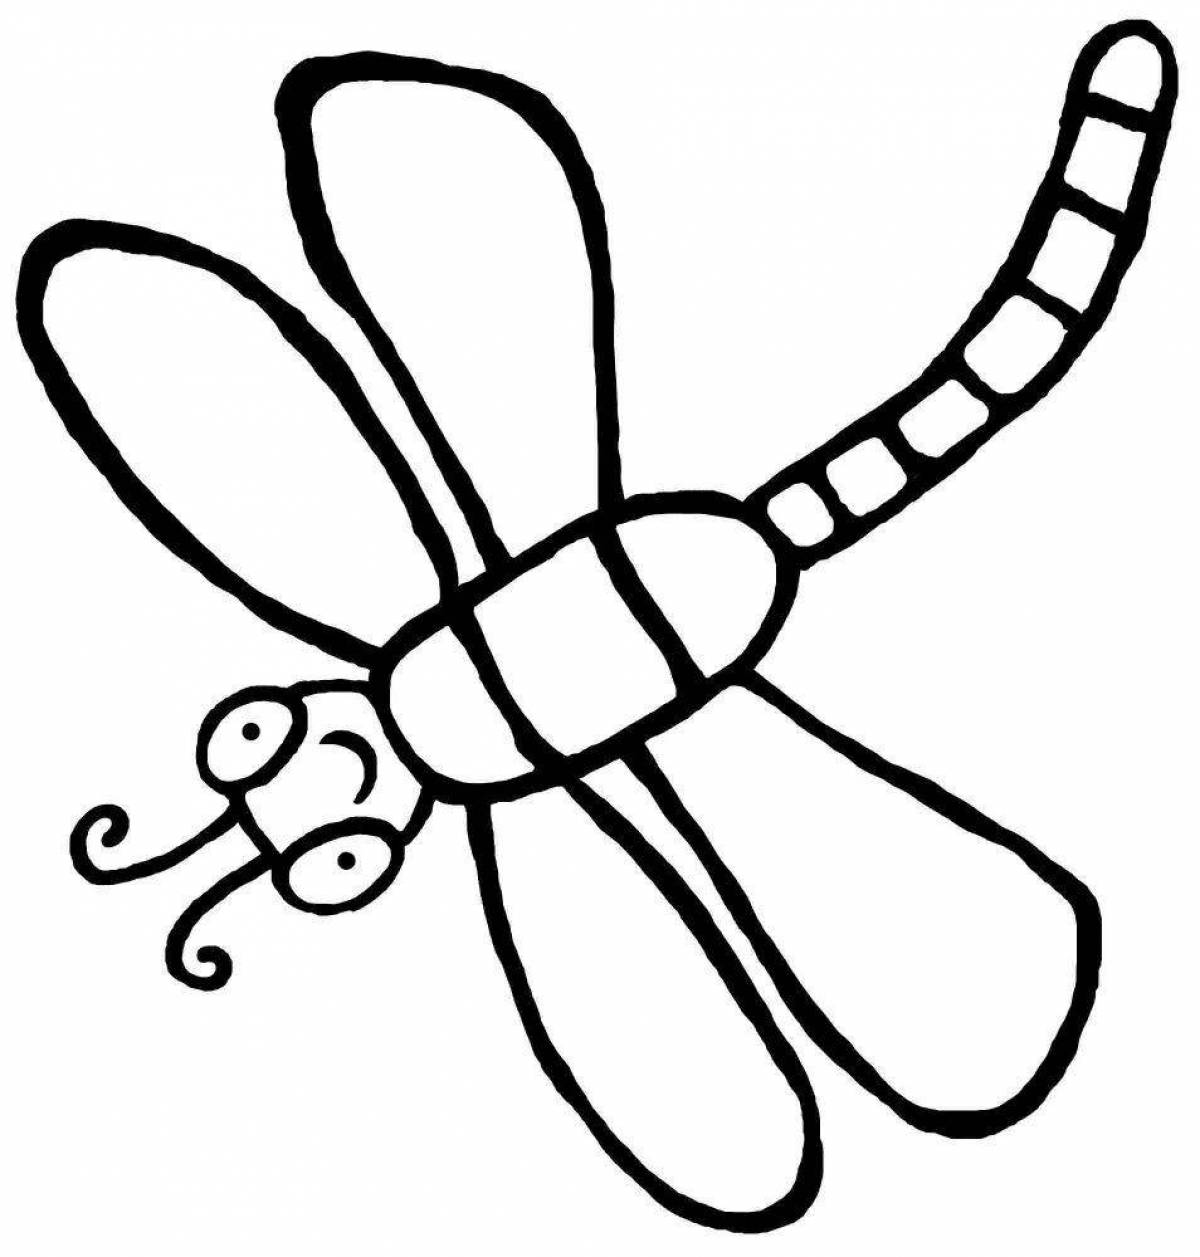 Exquisite dragonfly coloring book for kids